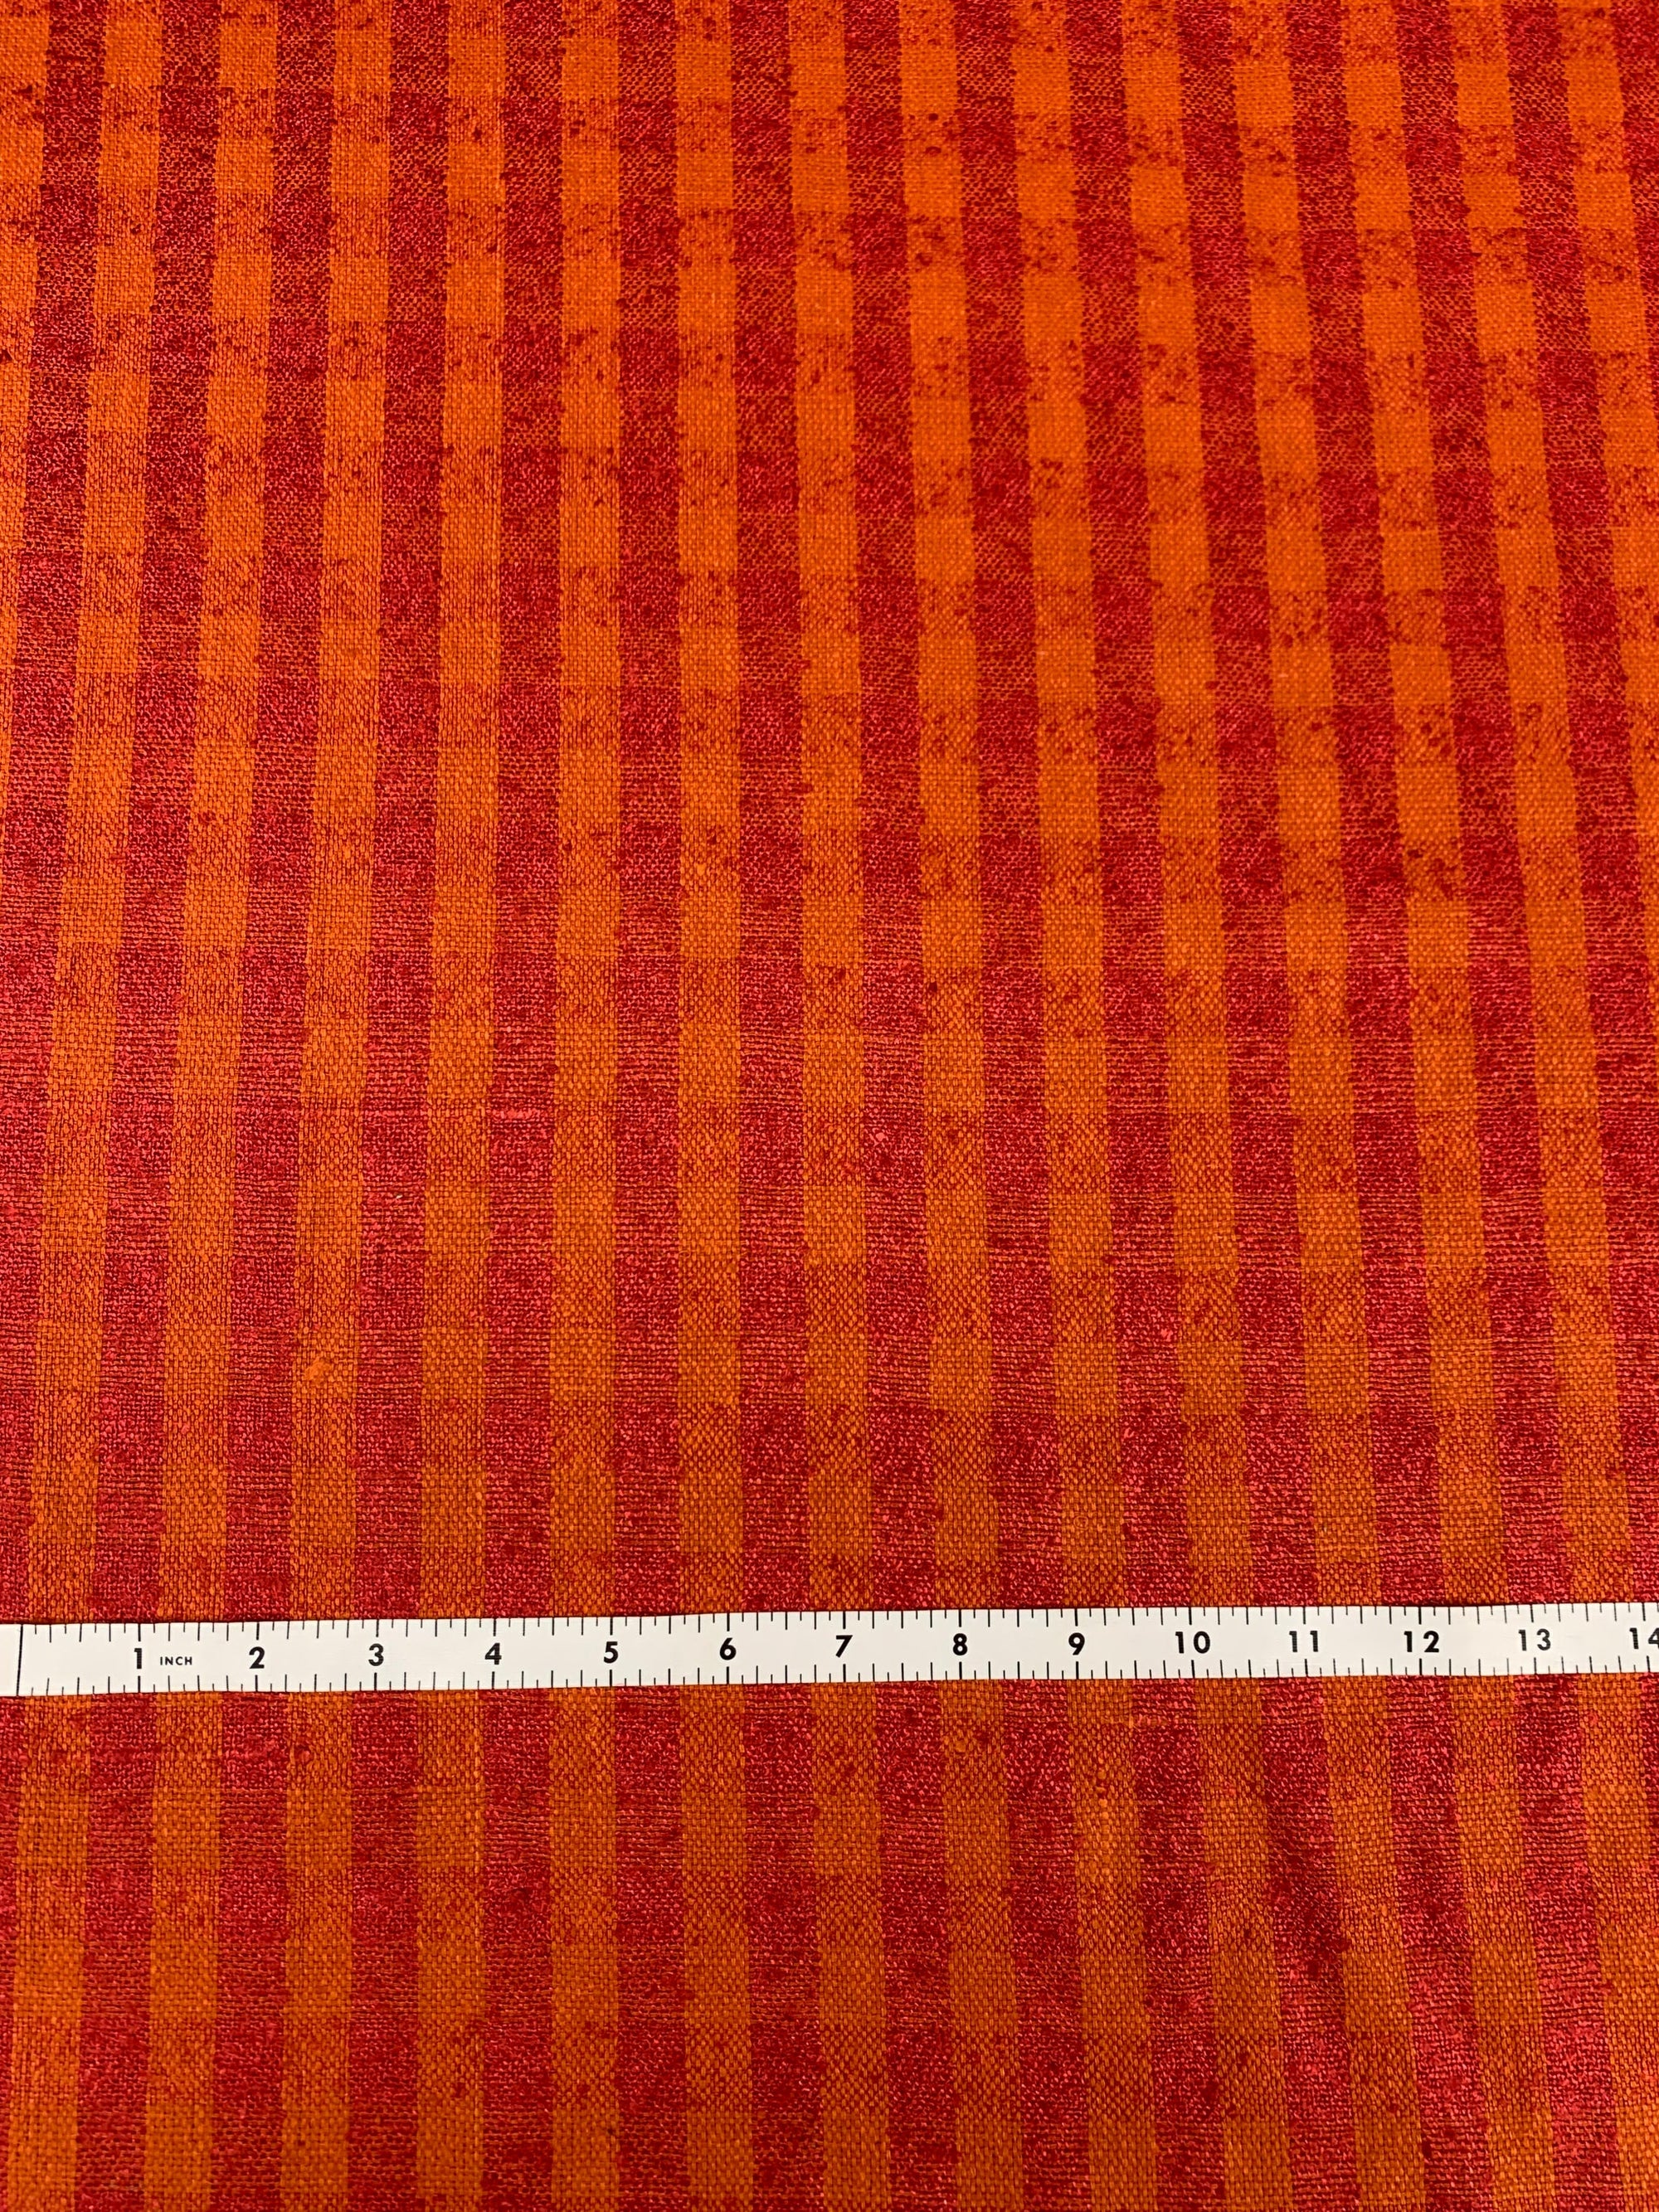 raw silk in a orange and red check with a measuring tape on the bottom. Checks are half and inch wide.